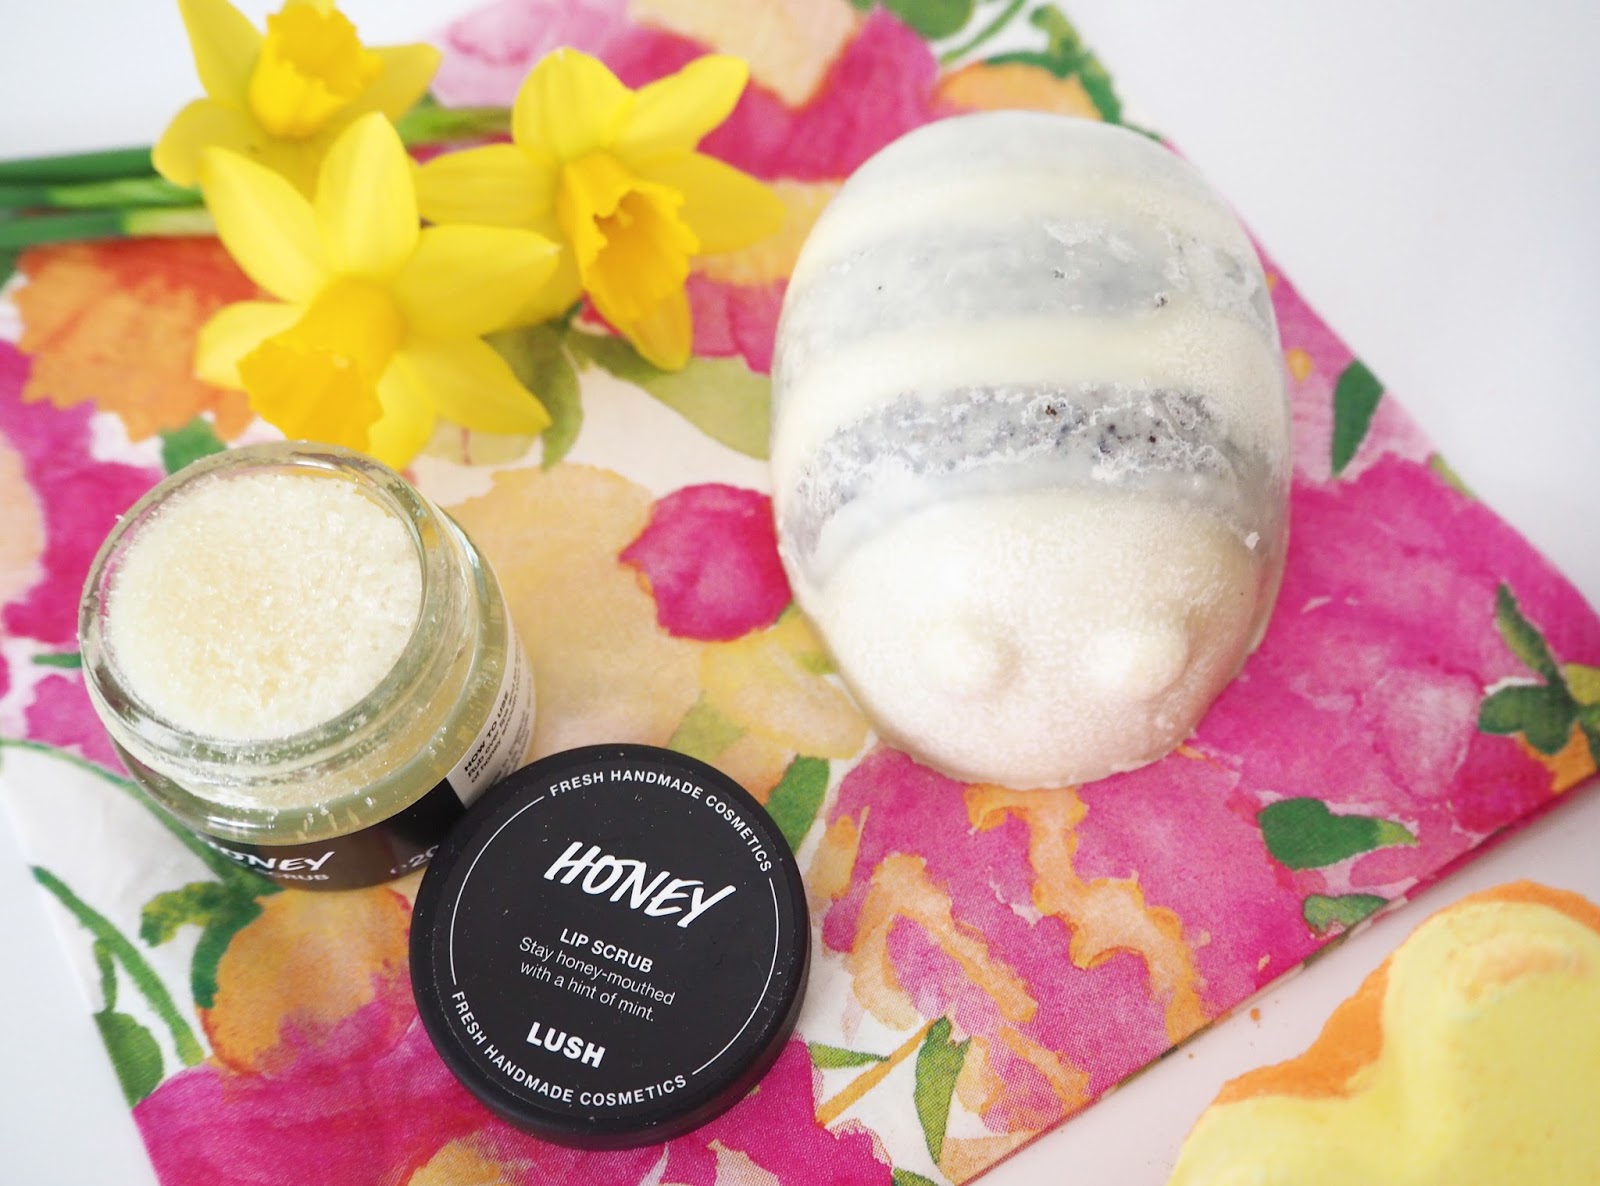 Lush Mother's Day Collection 2017,  Katie Kirk Loves, Lush Cosmetics UK, Lush 2017, Beauty Blogger, UK Blogger, Gifts For Her, Mother's Day Gifts, Gift Ideas, Lush Review, Lush Gifts, Bath & Body Products, Blogger Review